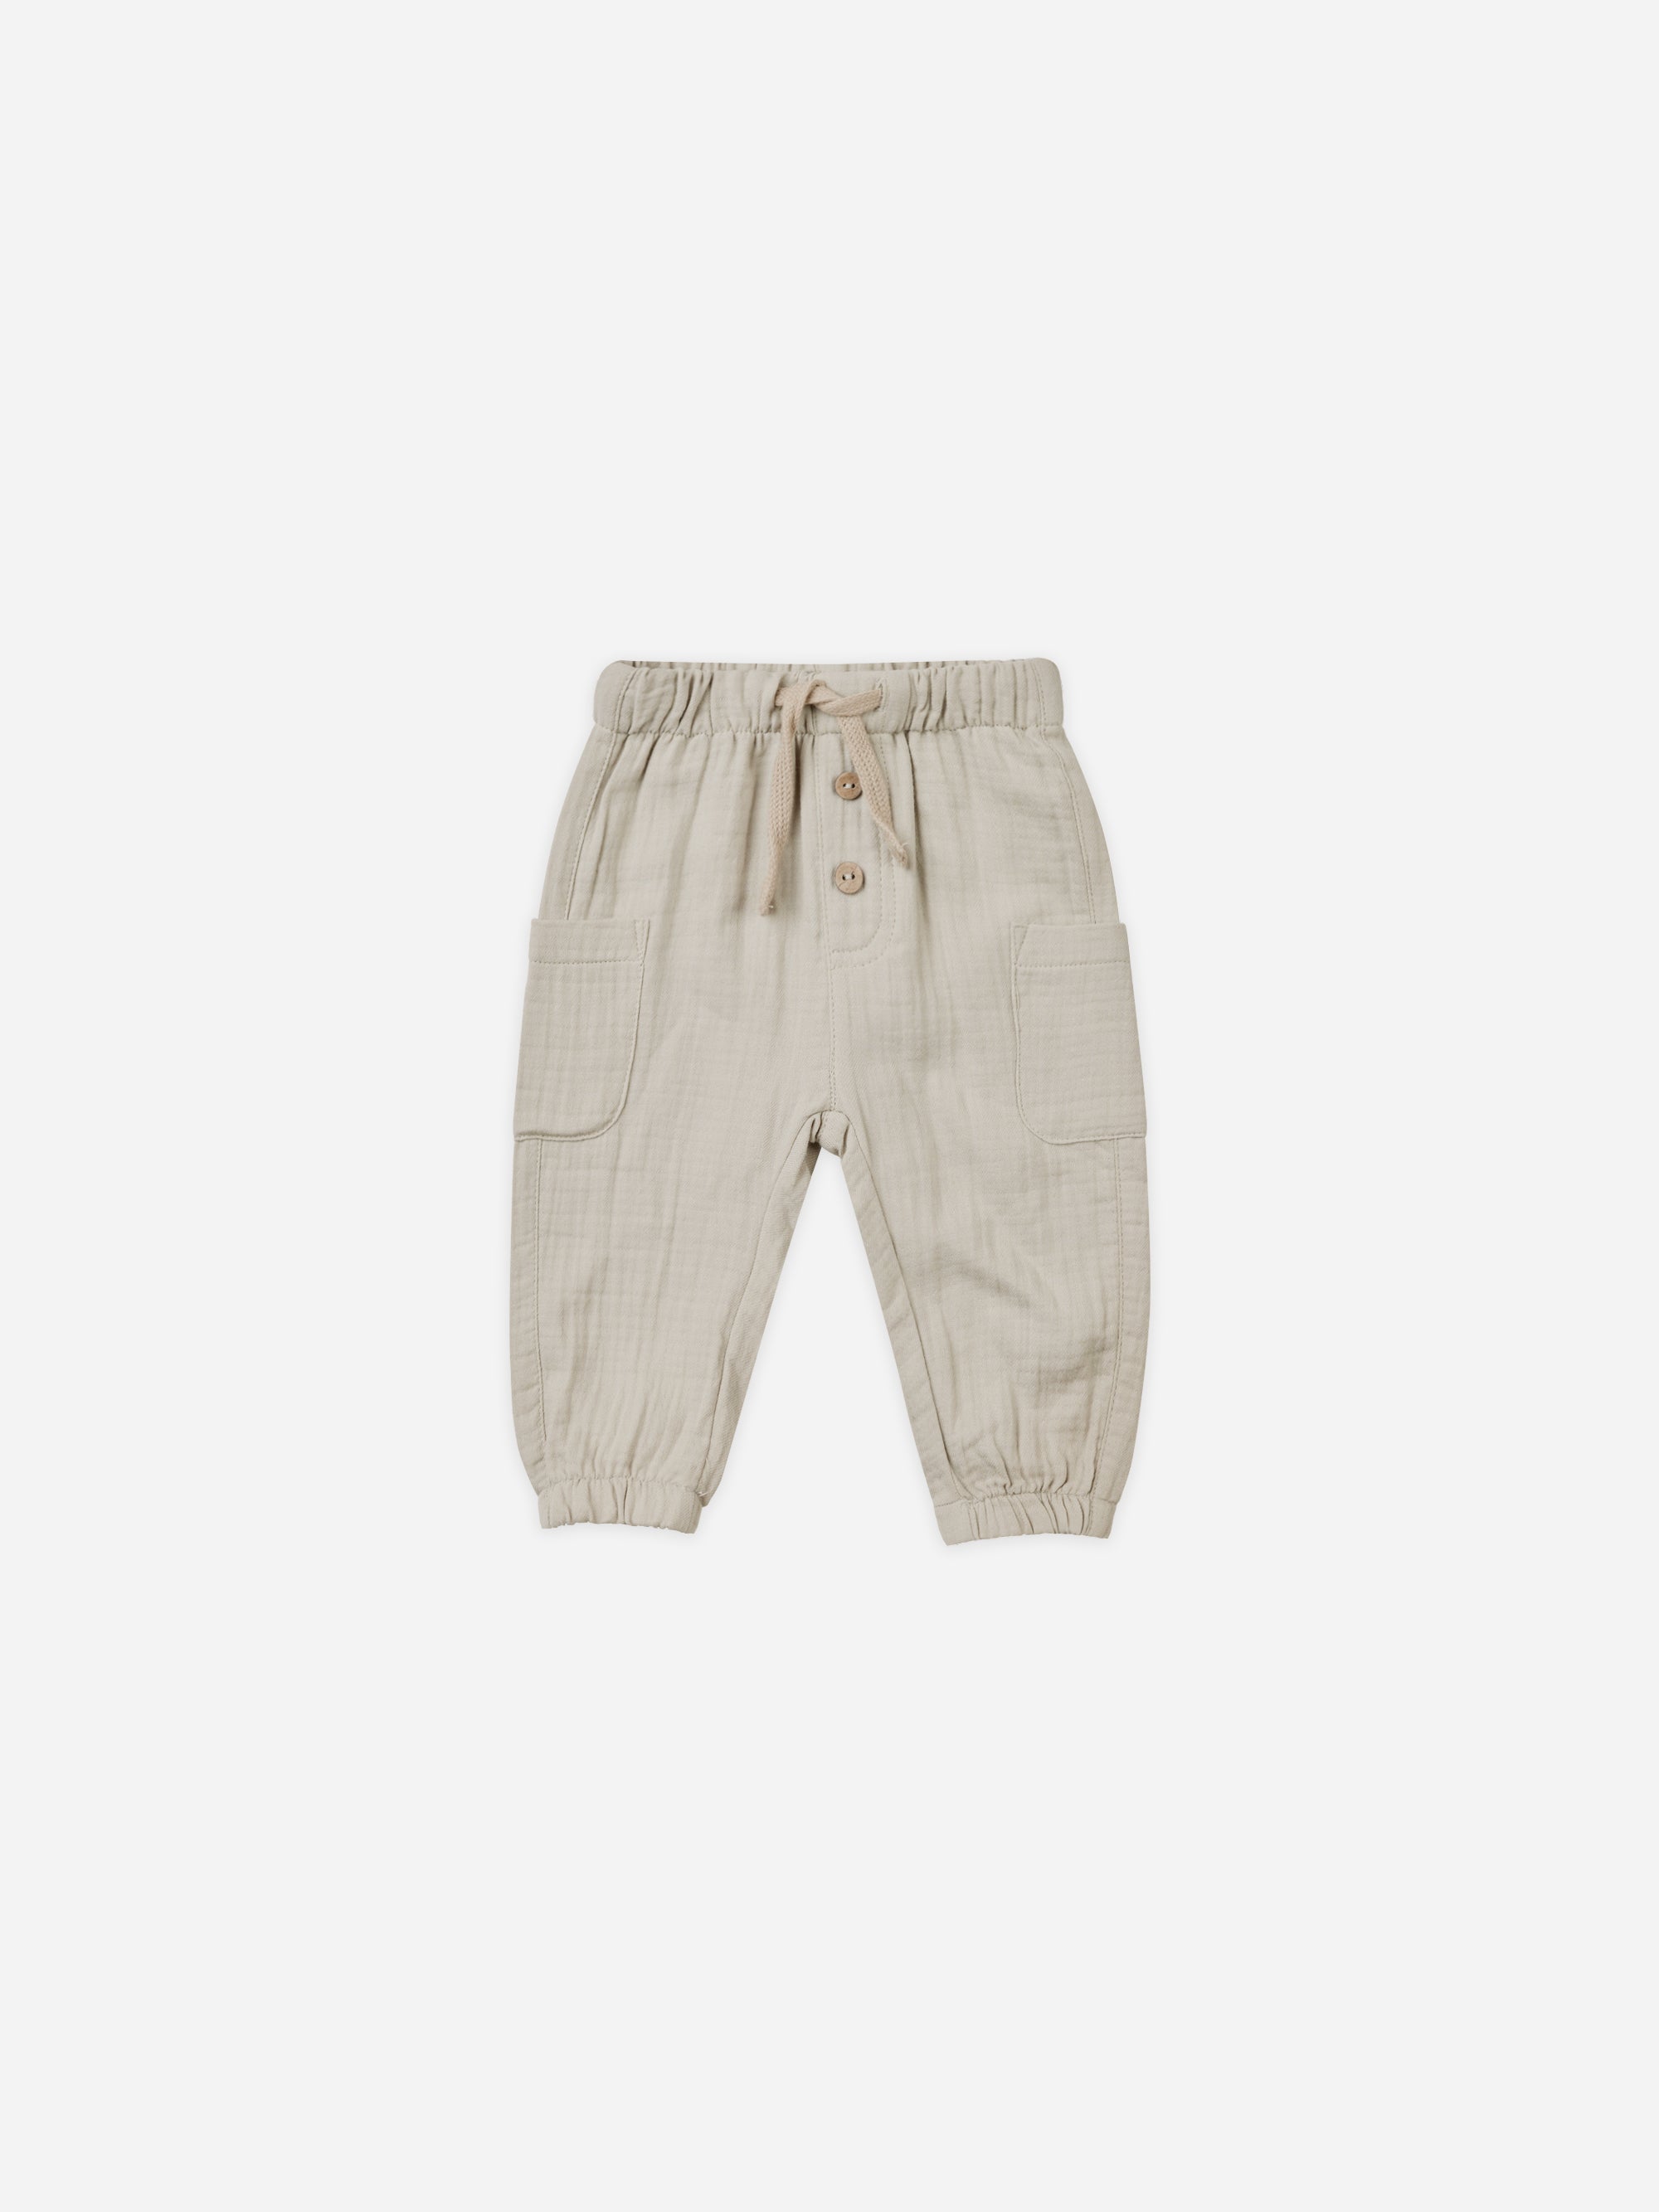 Luca Pant || Ash - Rylee + Cru | Kids Clothes | Trendy Baby Clothes | Modern Infant Outfits |